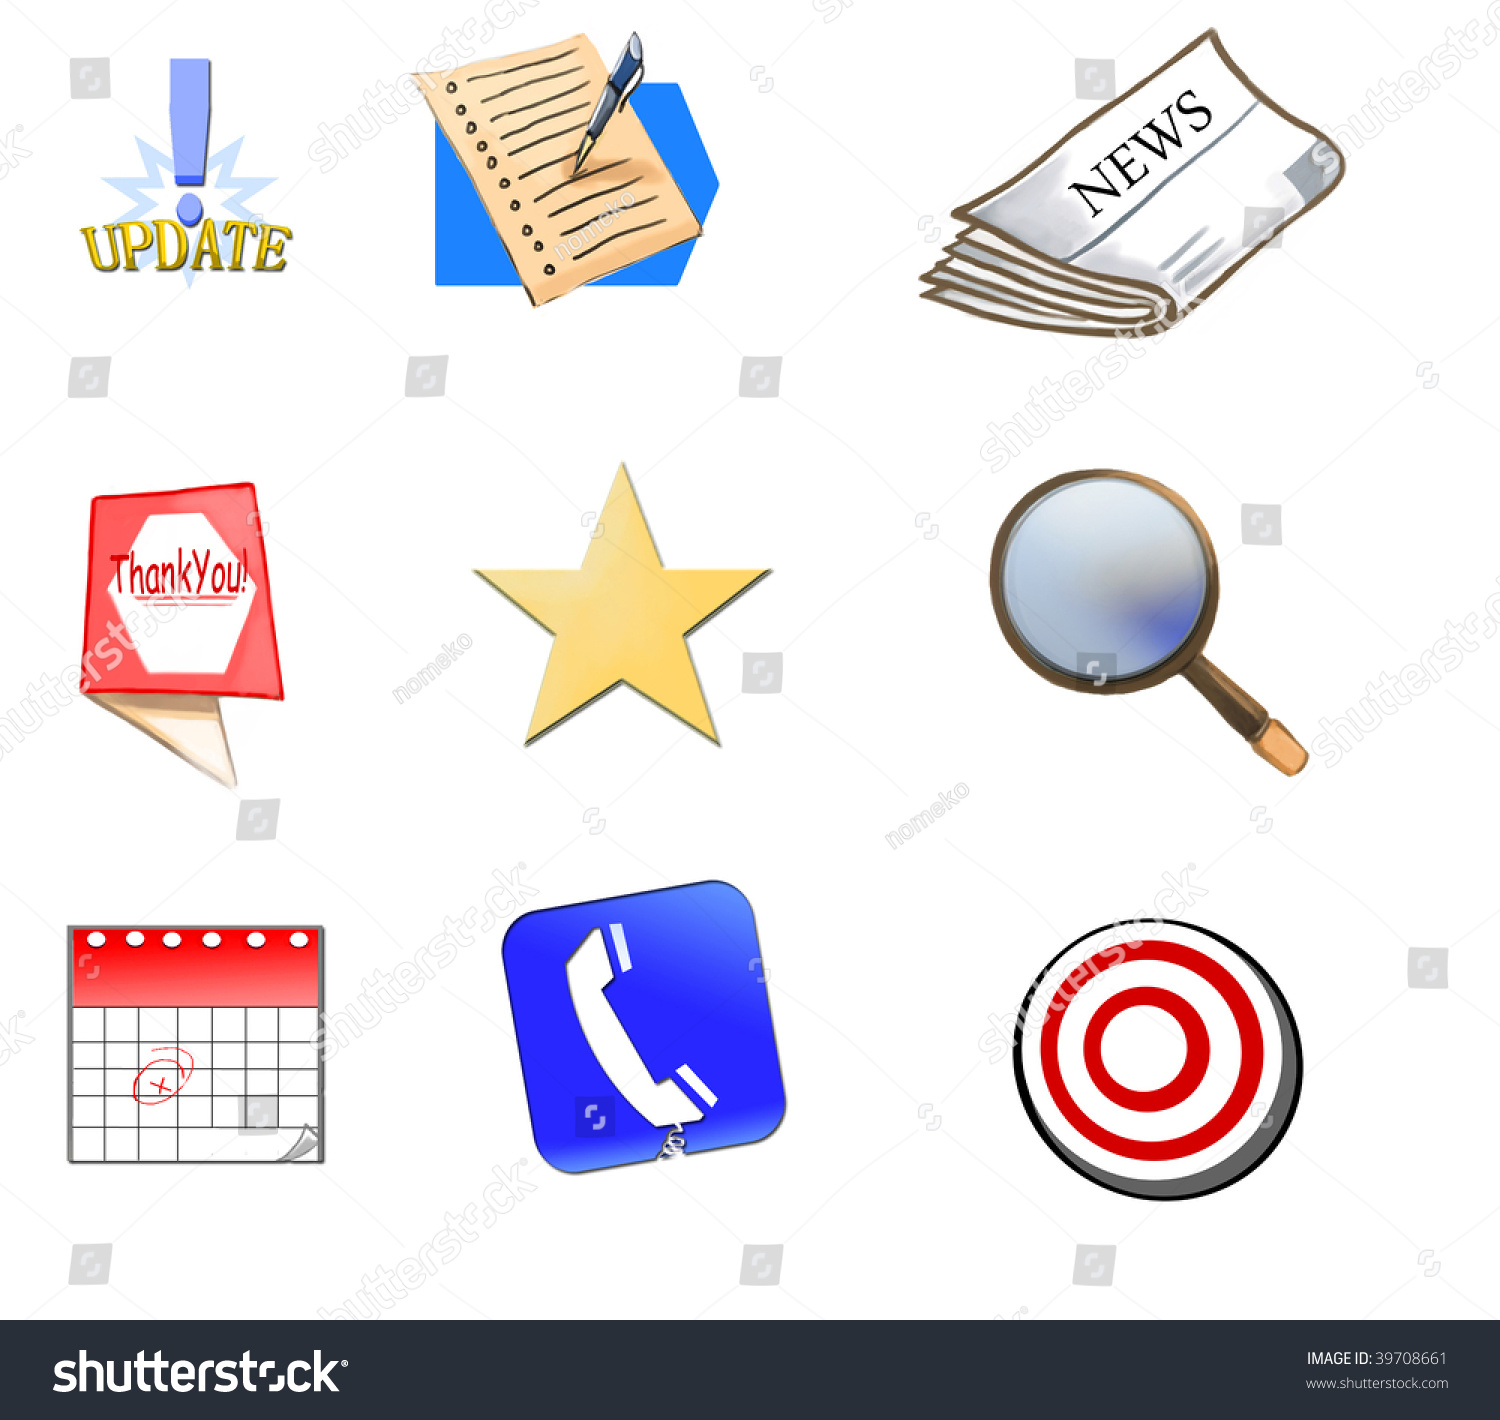 word clipart database - photo #25